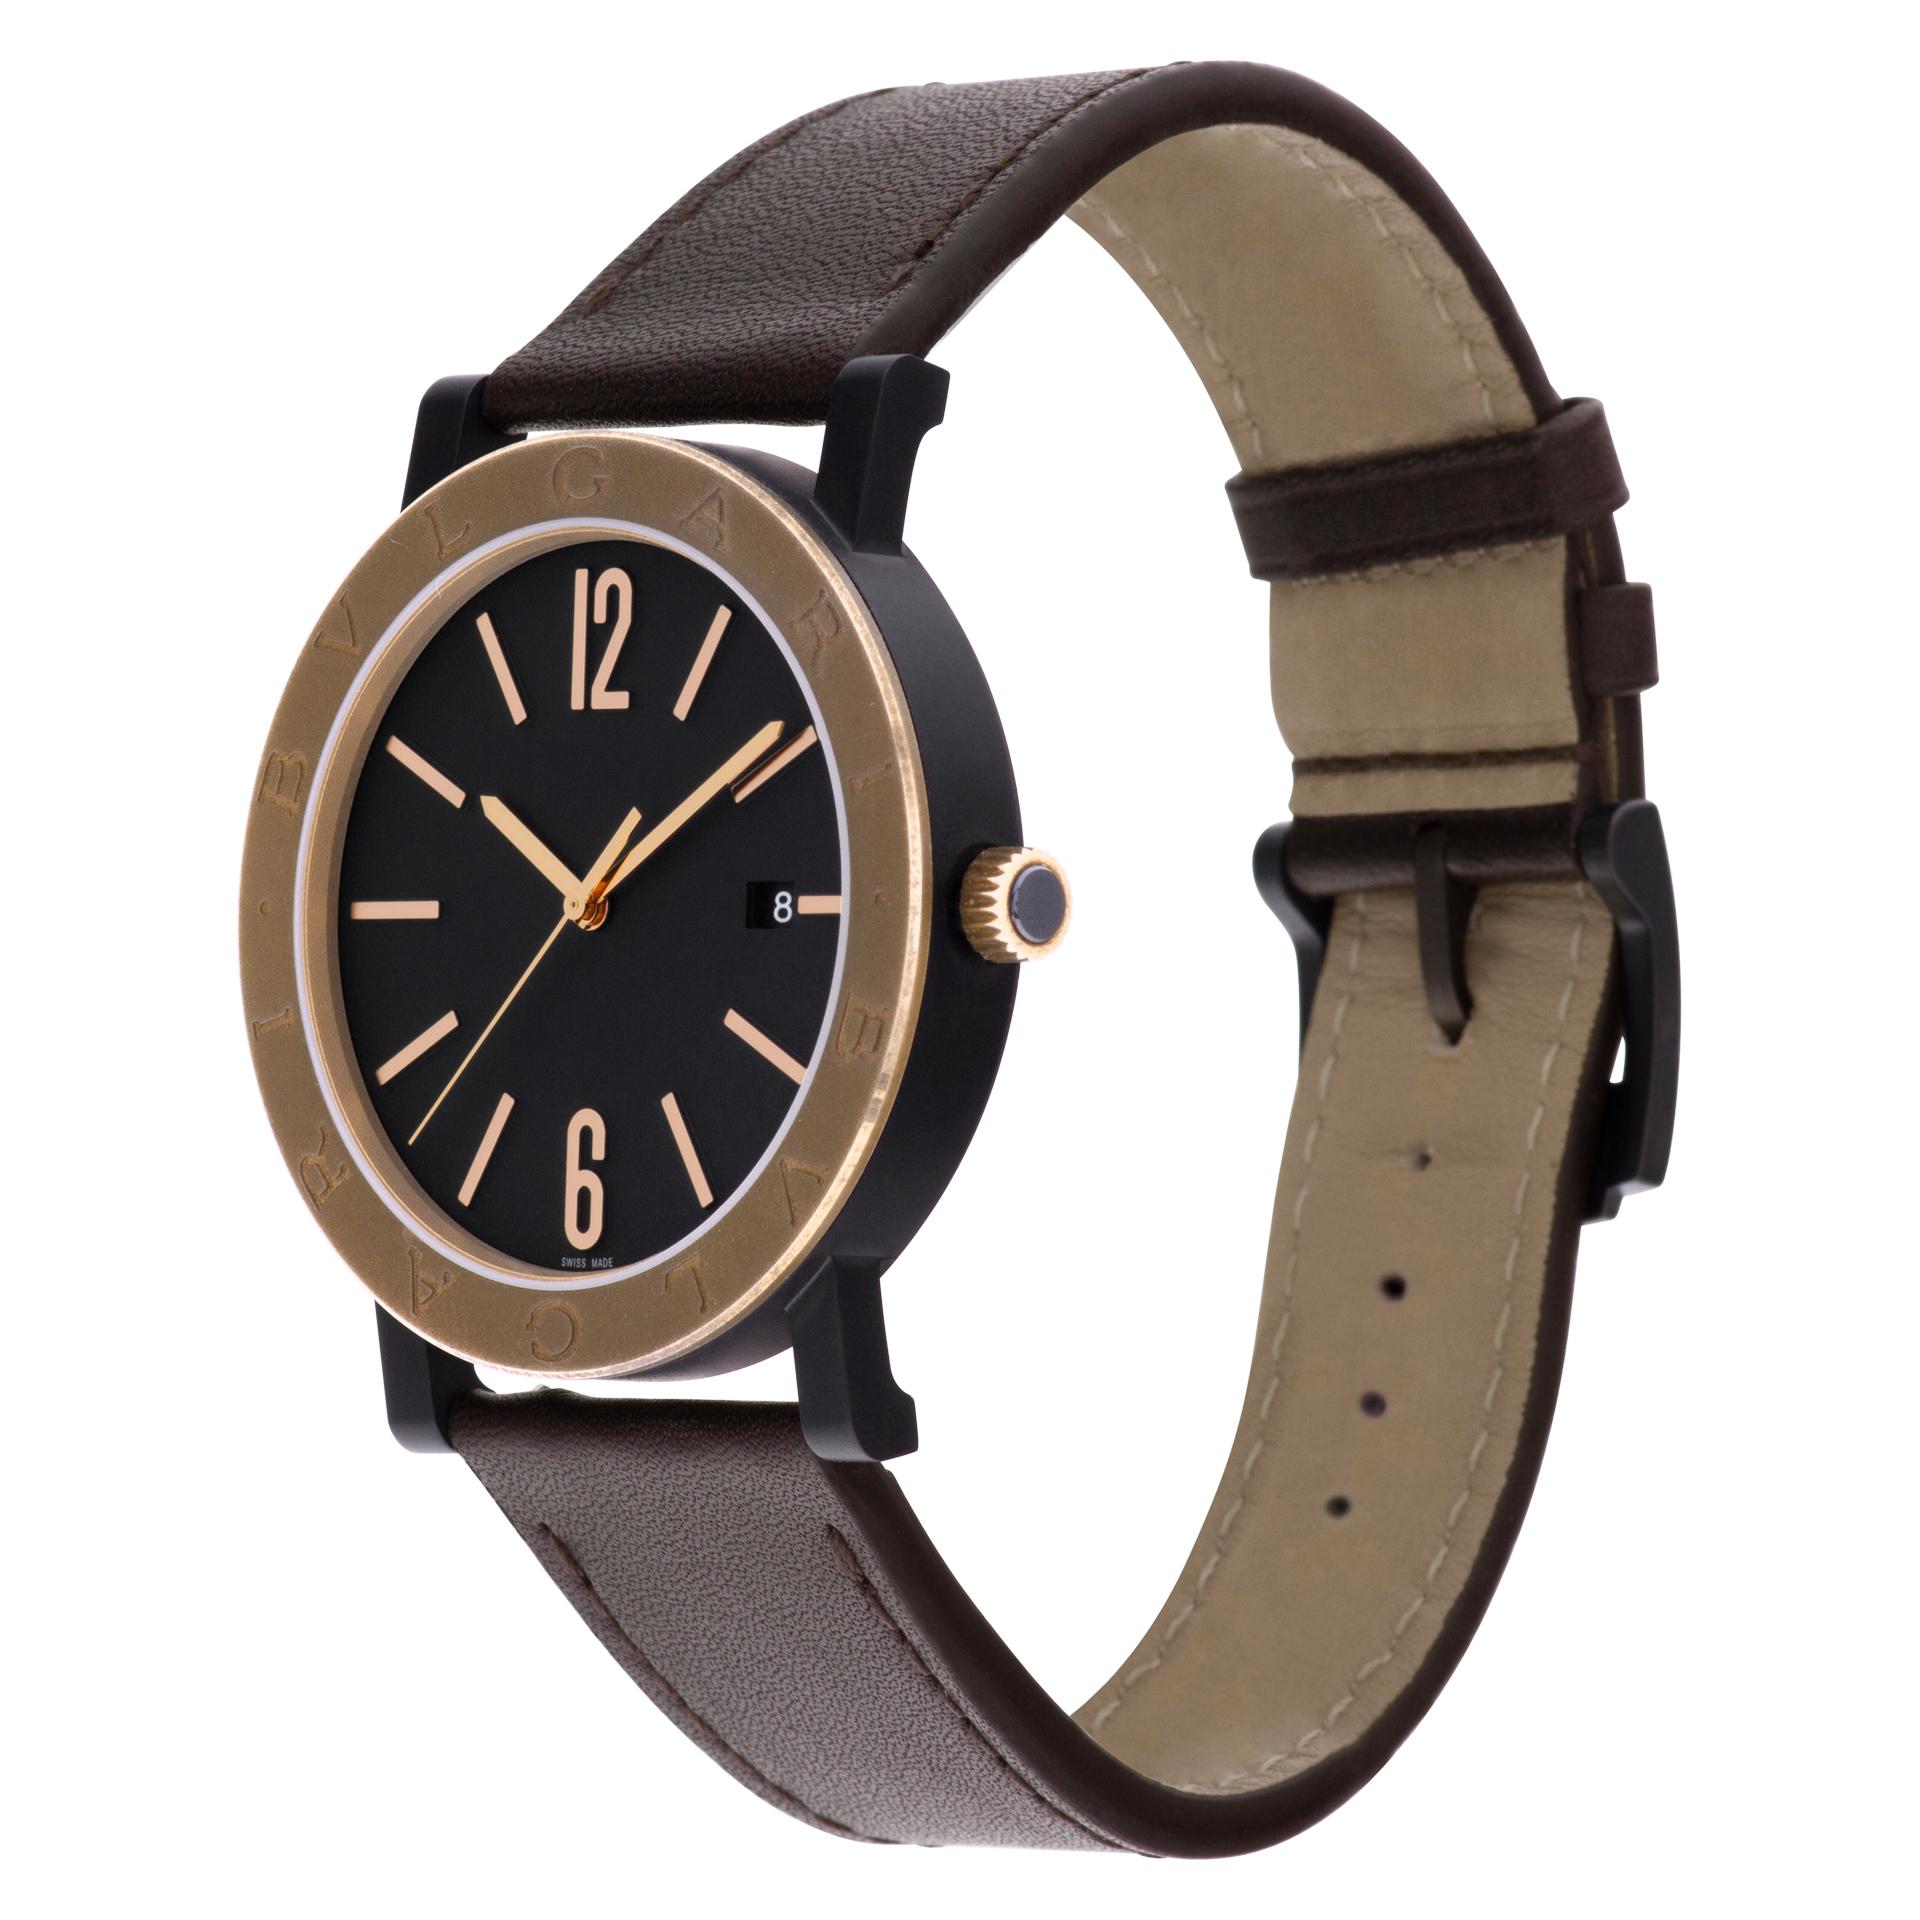 Bvlgari Solotempo with bronze bezel in black DLC stainless steel on leather strap. Auto w/ sweep seconds and date. 41 mm case size. Ref BB41SB. Circa 2010s. Fine Pre-owned Bvlgari / Bulgari Watch.   Certified preowned Classic Bvlgari Solotempo